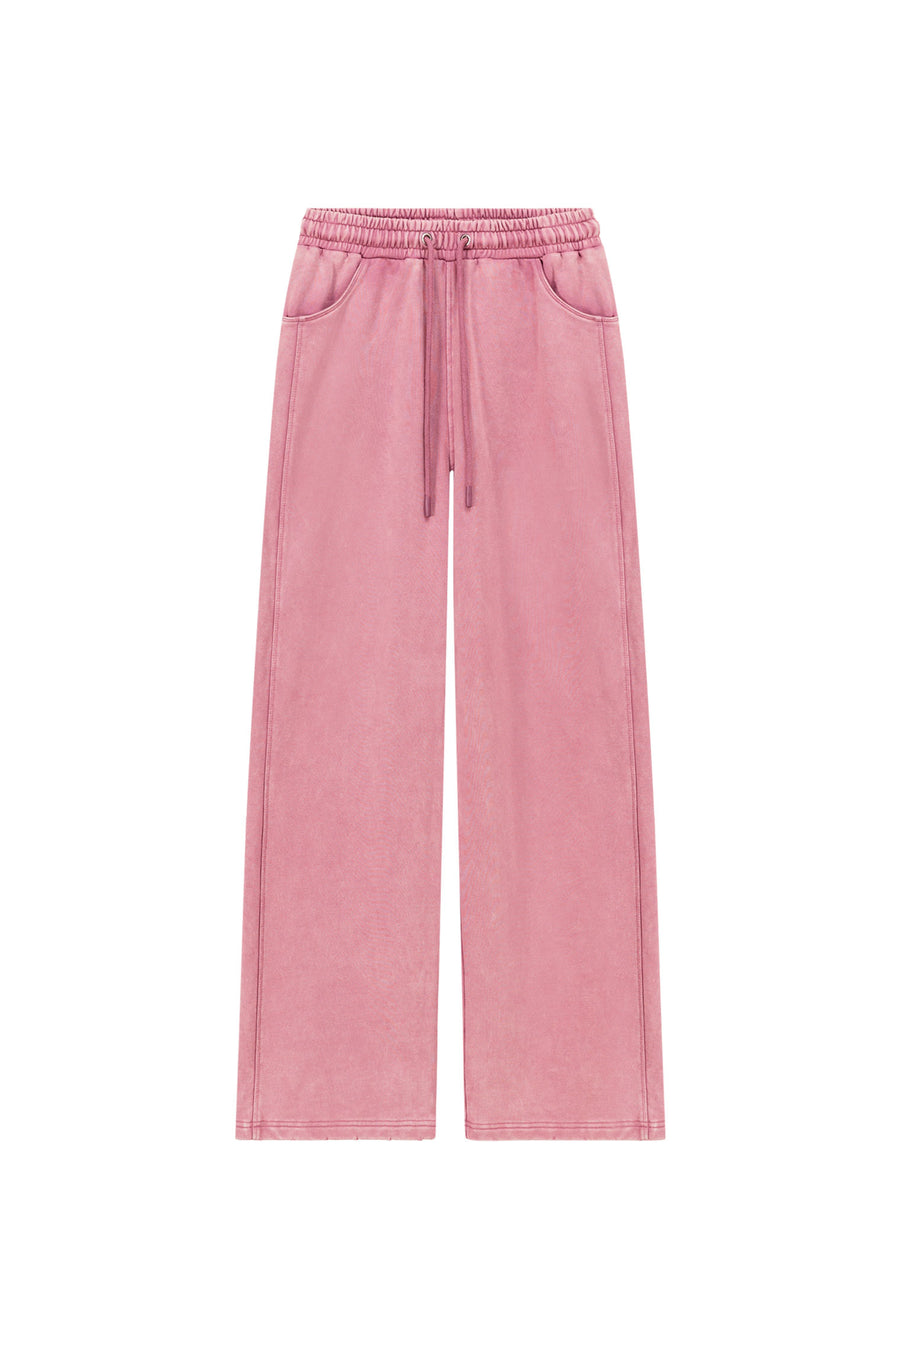 Simple Wide Casual String Pants